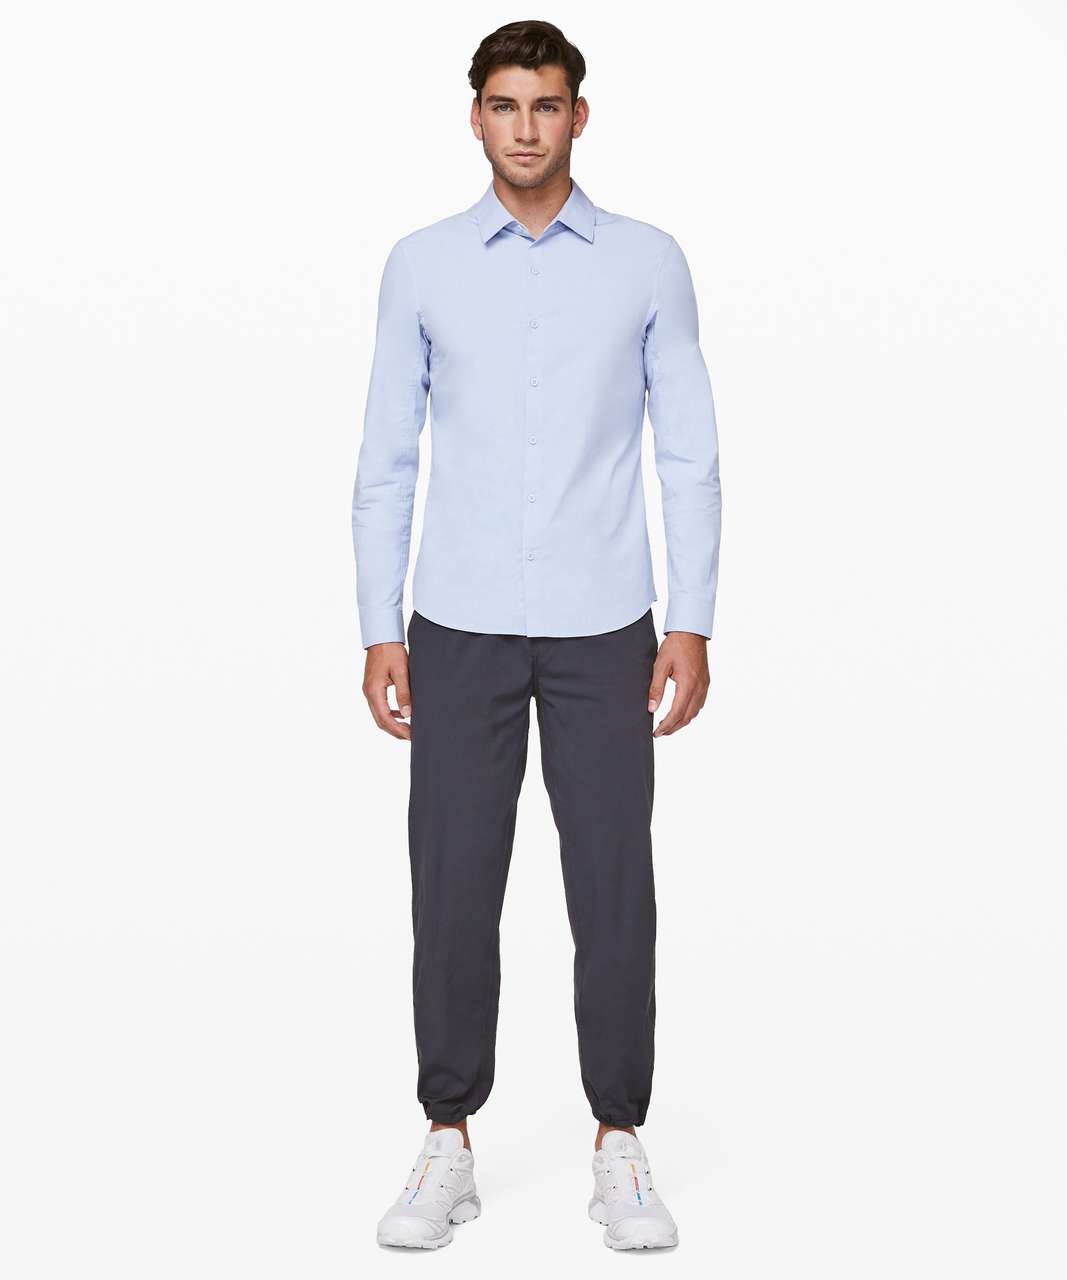 Lululemon Down to the Wire Slim Fit Long Sleeve - Heathered Oasis Blue (First Release)